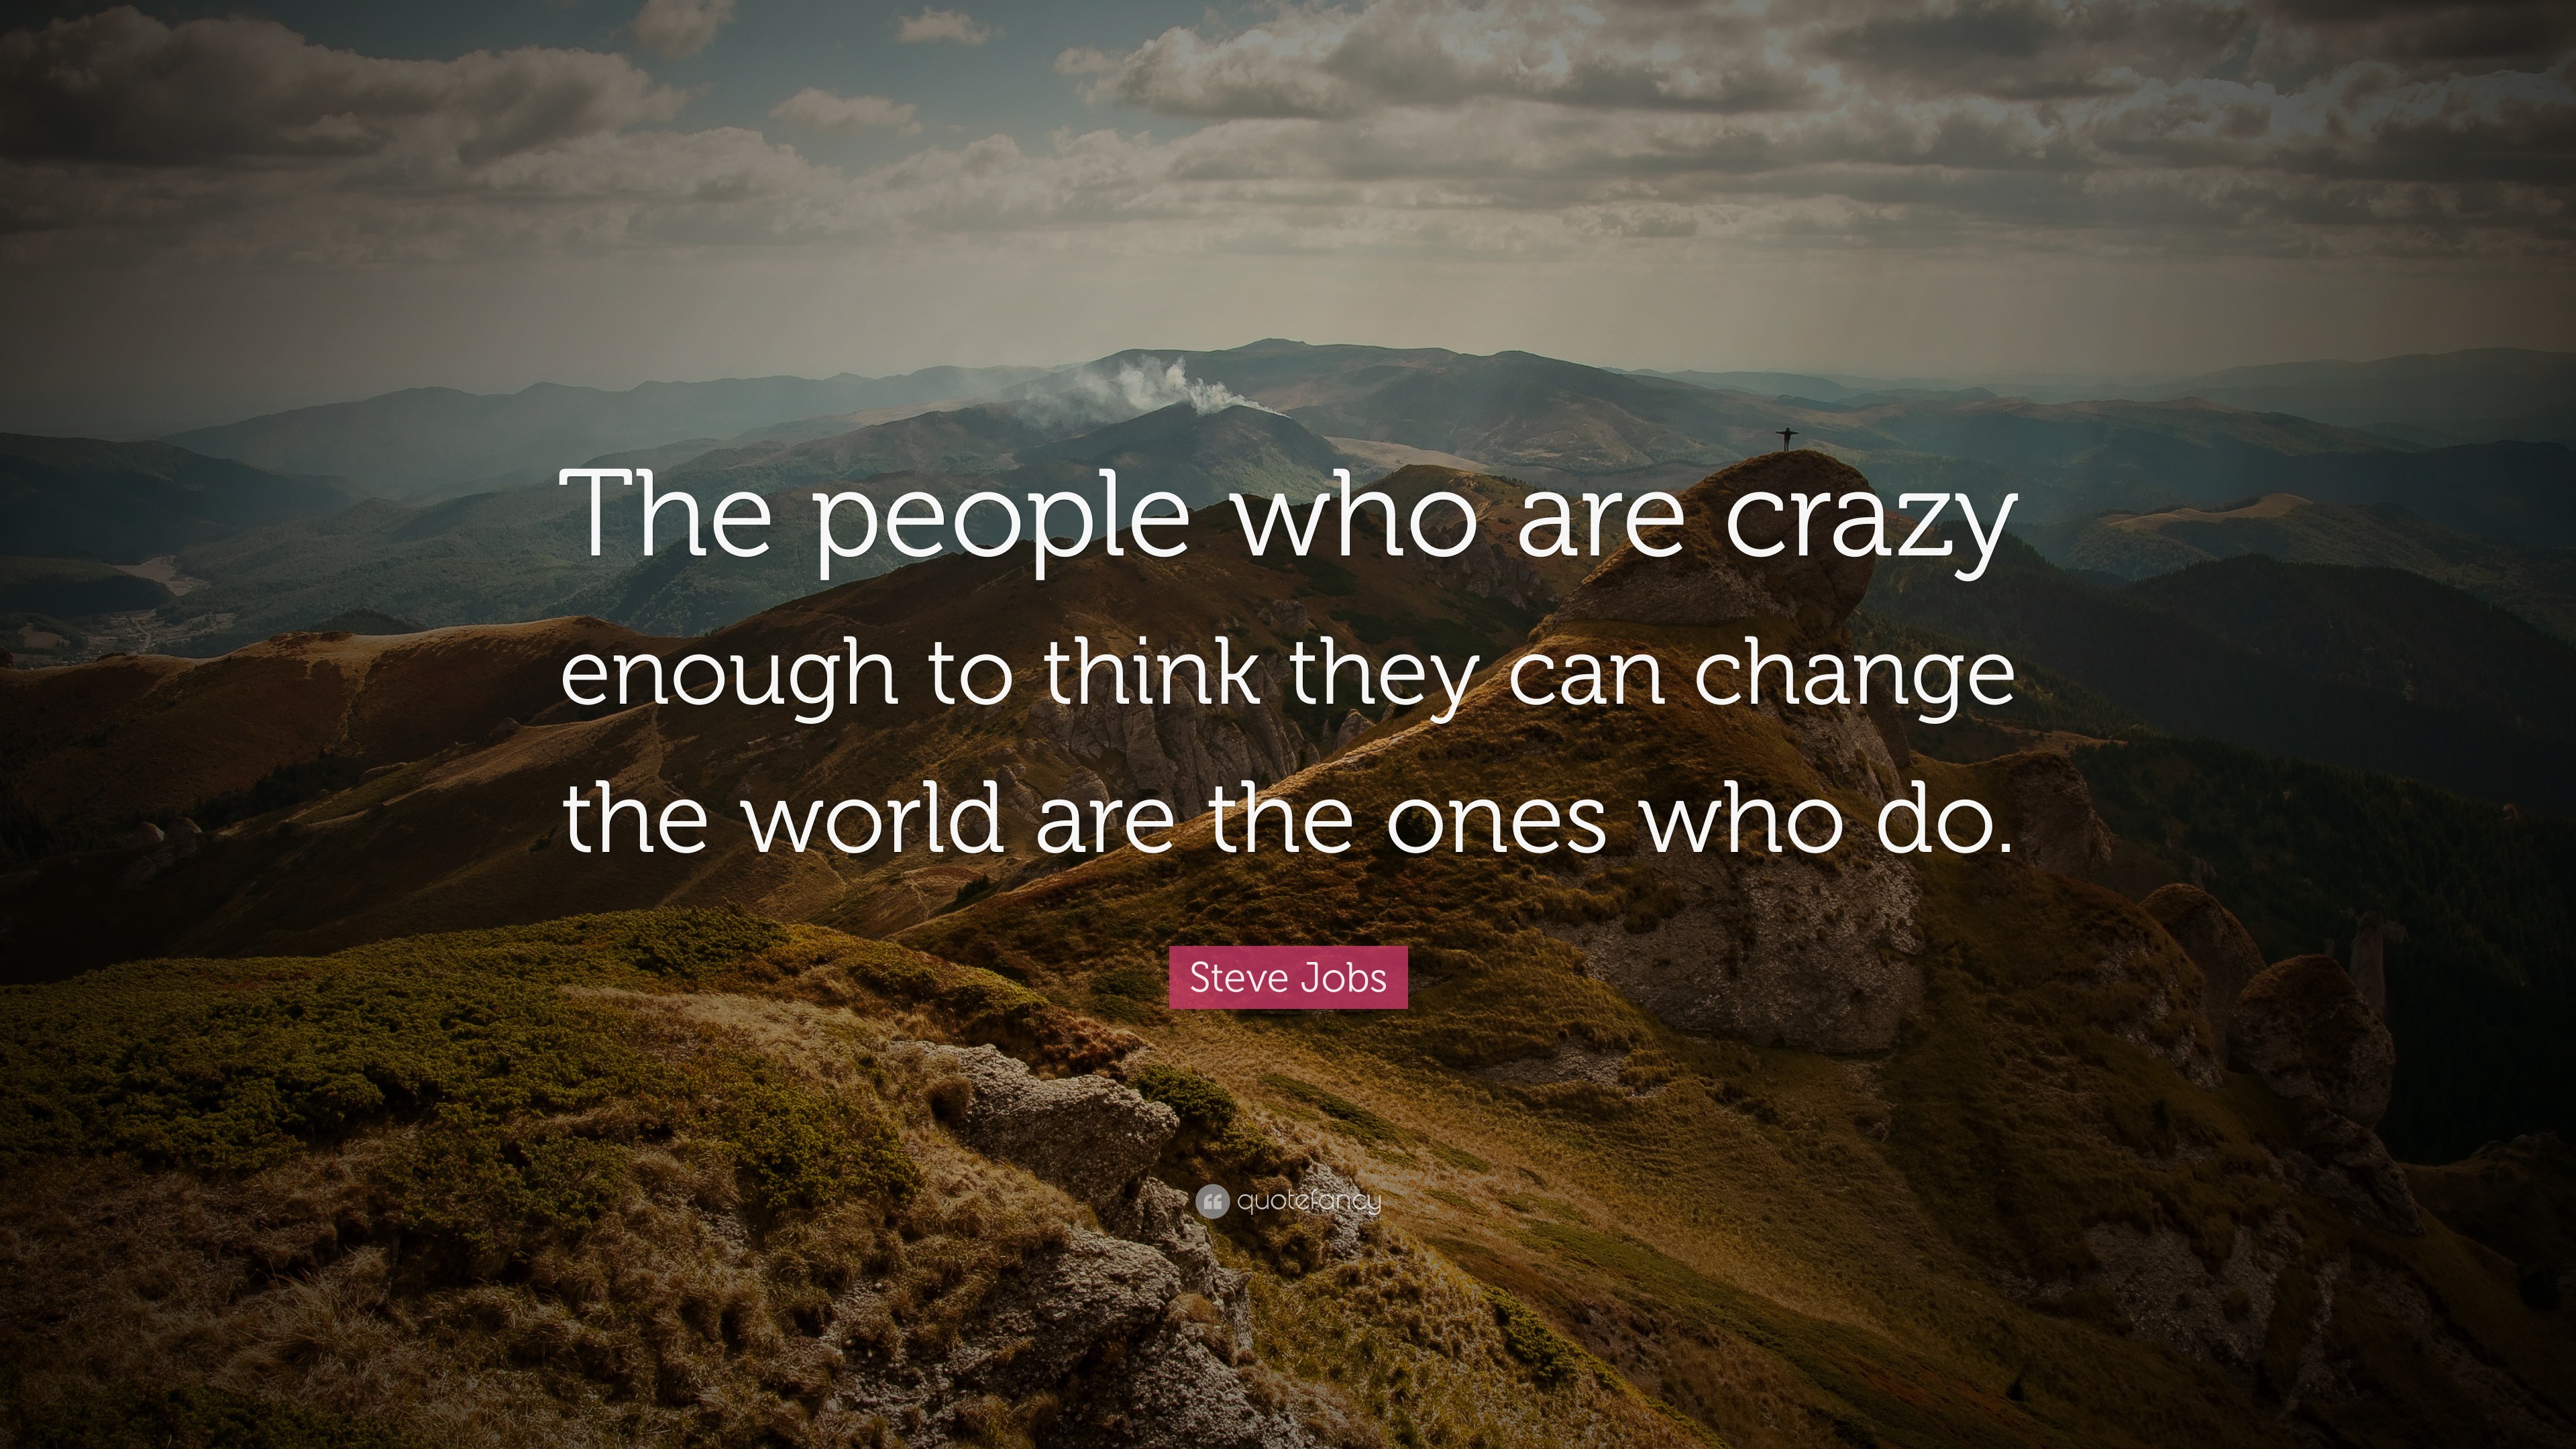 Steve Jobs Quote: "The people who are crazy enough to ...